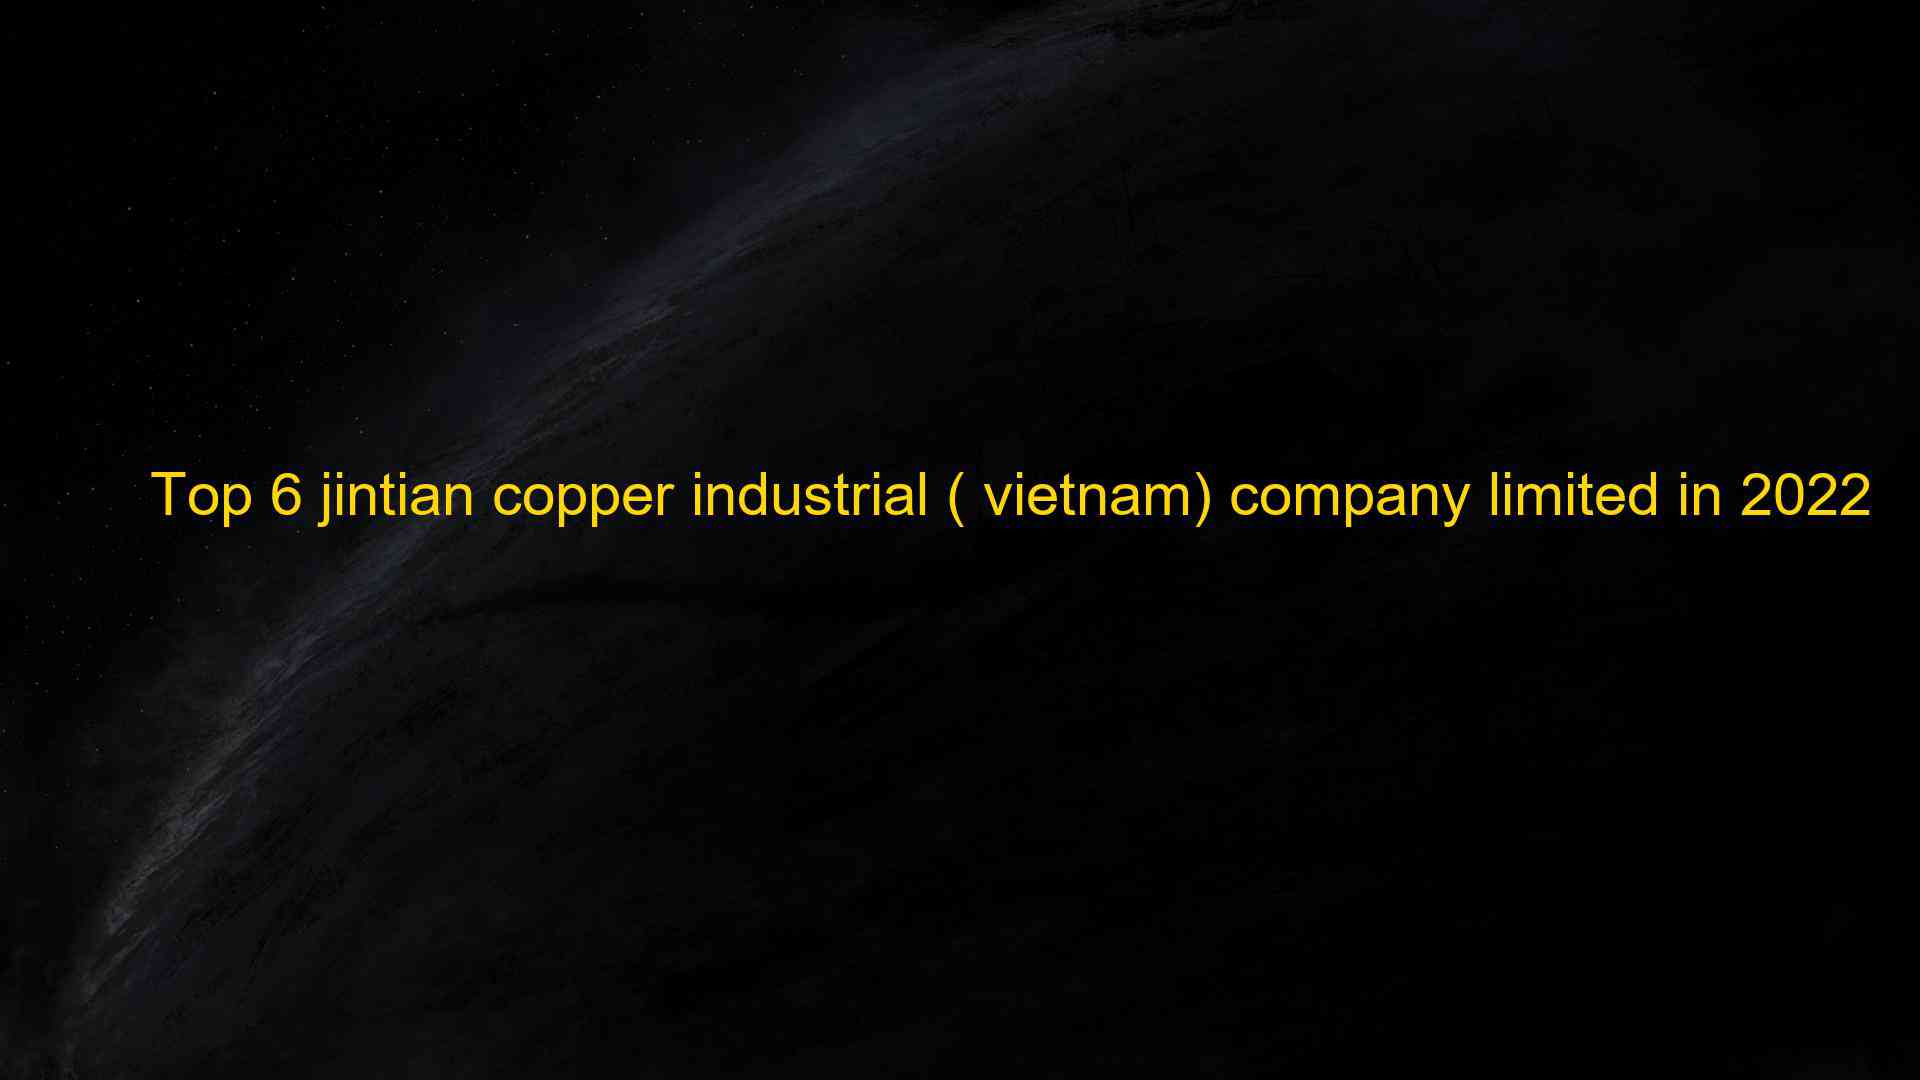 Top 6 jintian copper industrial vietnam company limited in 2022 1660076182